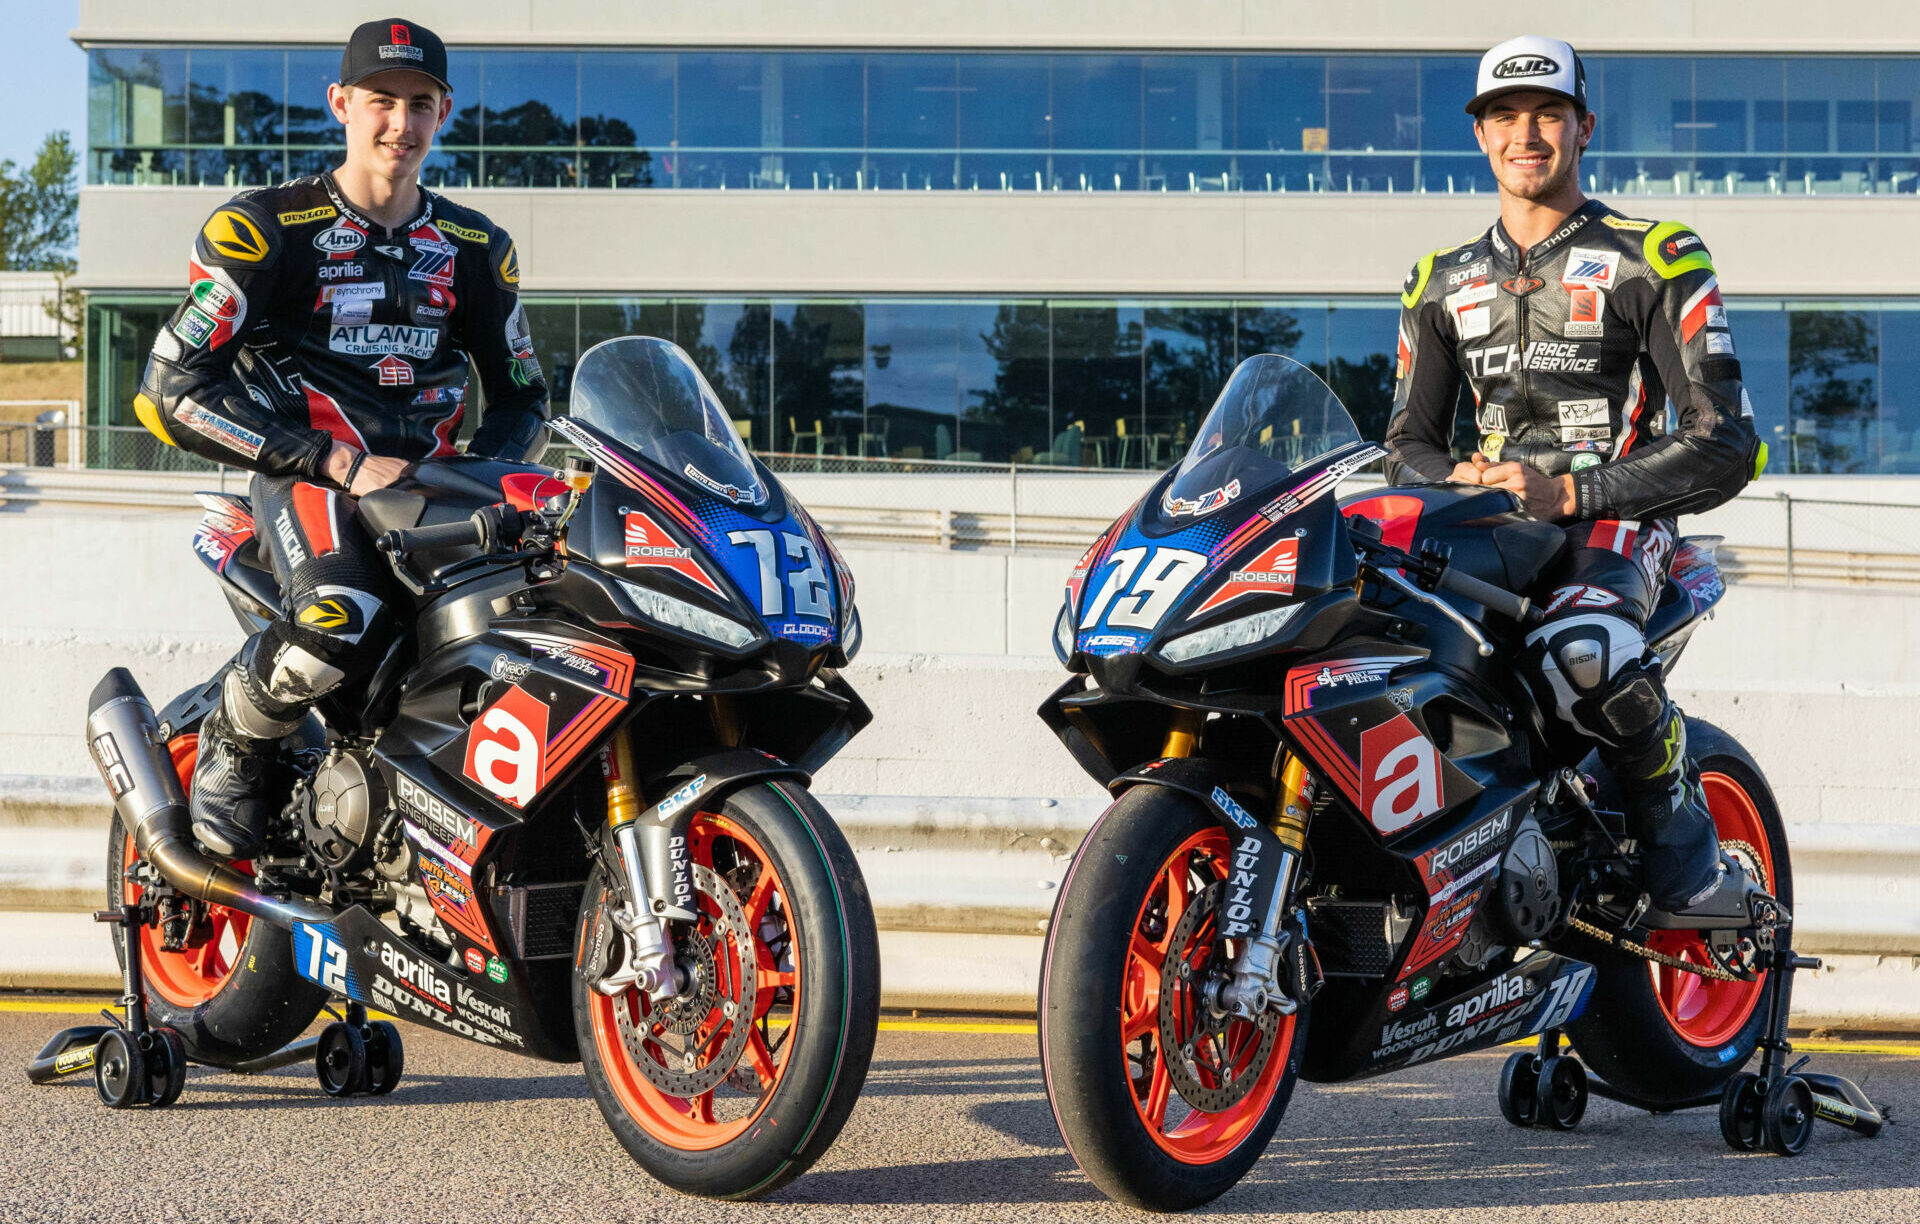 Robem Engineering's MotoAmerica Twins Cup racers Ben Gloddy (left) and Teagg Hobbs (right) are two of four Americans racing in the Aprilia RS 660 Trofeo this coming weekend at the Vallelunga Circuit, in Italy. Photo by Sara Chappell Photos, courtesy Robem Engineering.